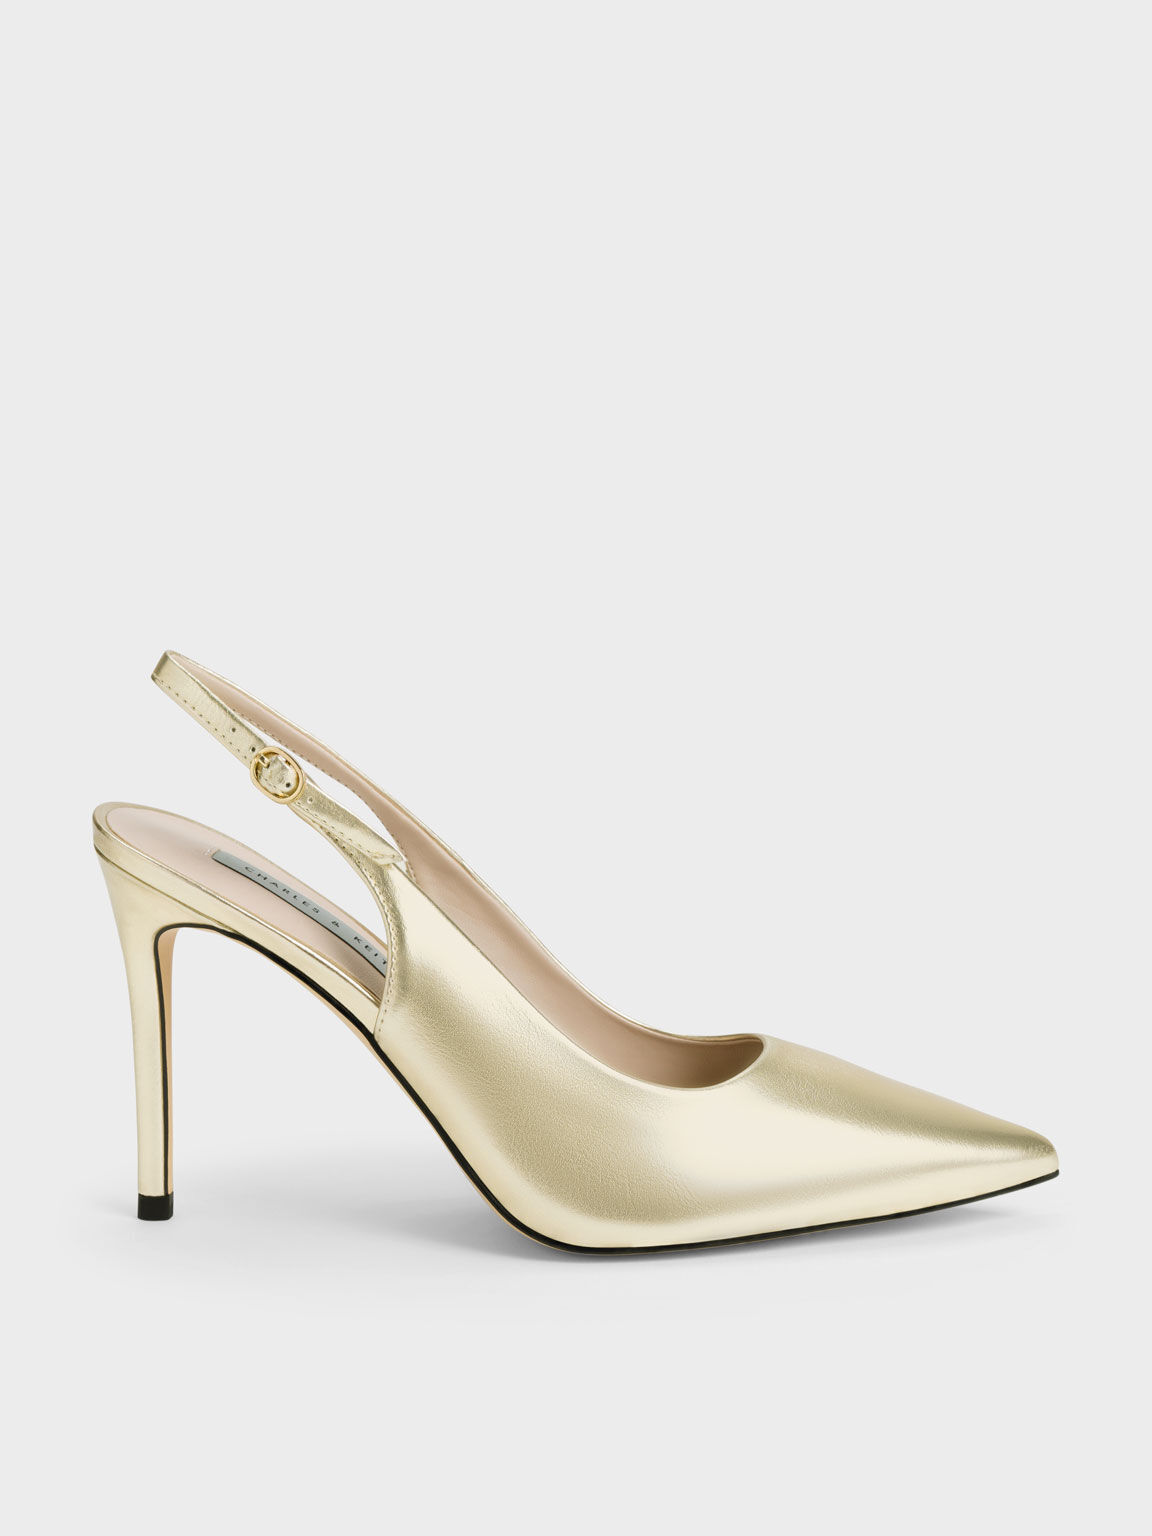 Diamond Talura 100 | Biscuit Calf Leather Pumps with Diamond Chain | New  Collection | JIMMY CHOO